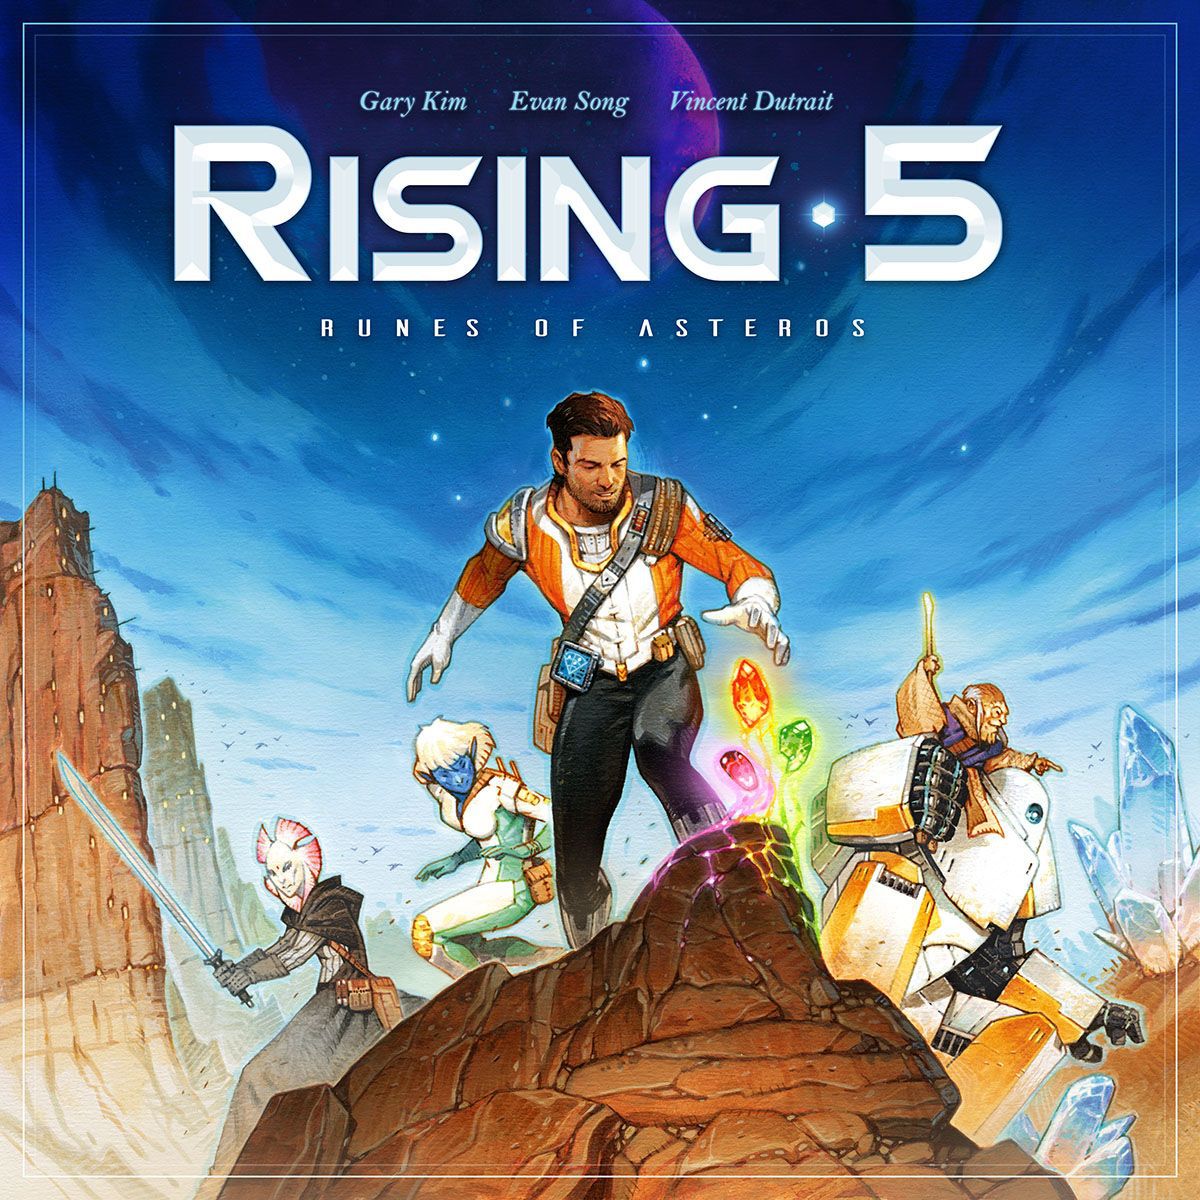 The cover art for the tabletop game Rising 5 showing 5 futurustic space warriors posing